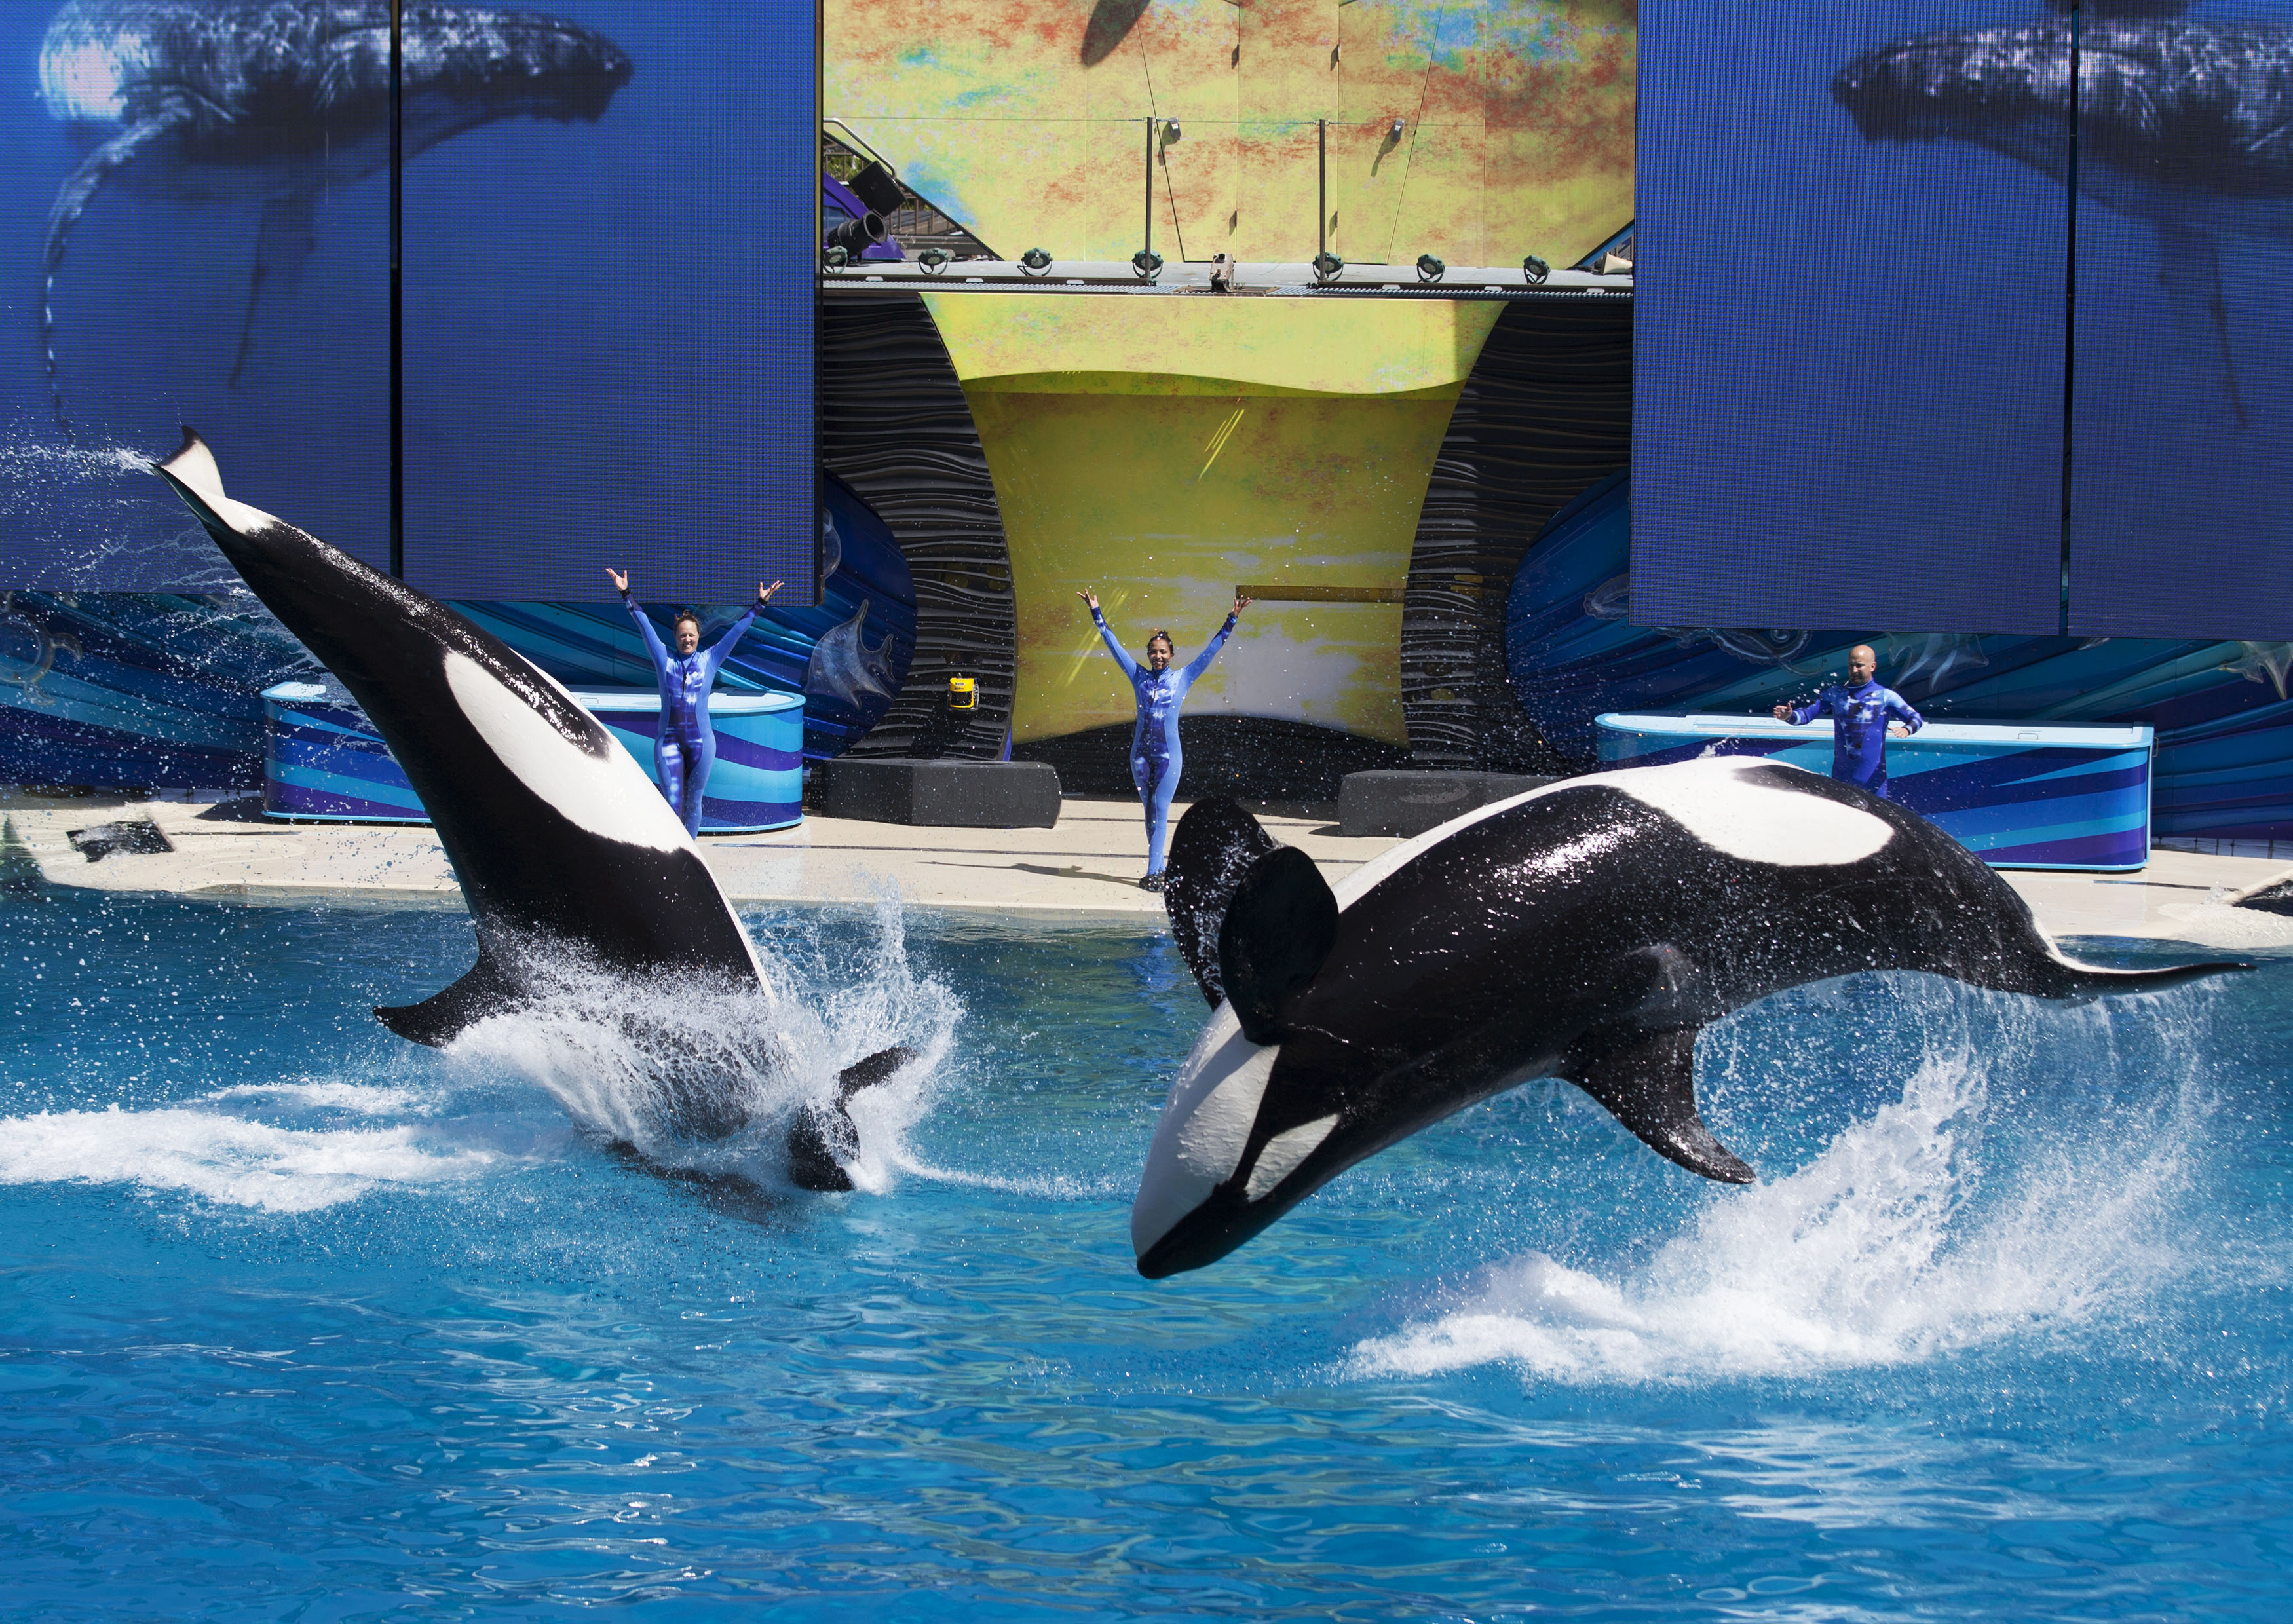 Trainers have Orca killer whales perform for the crowd  during a show at the animal theme park SeaWorld in San Diego, California